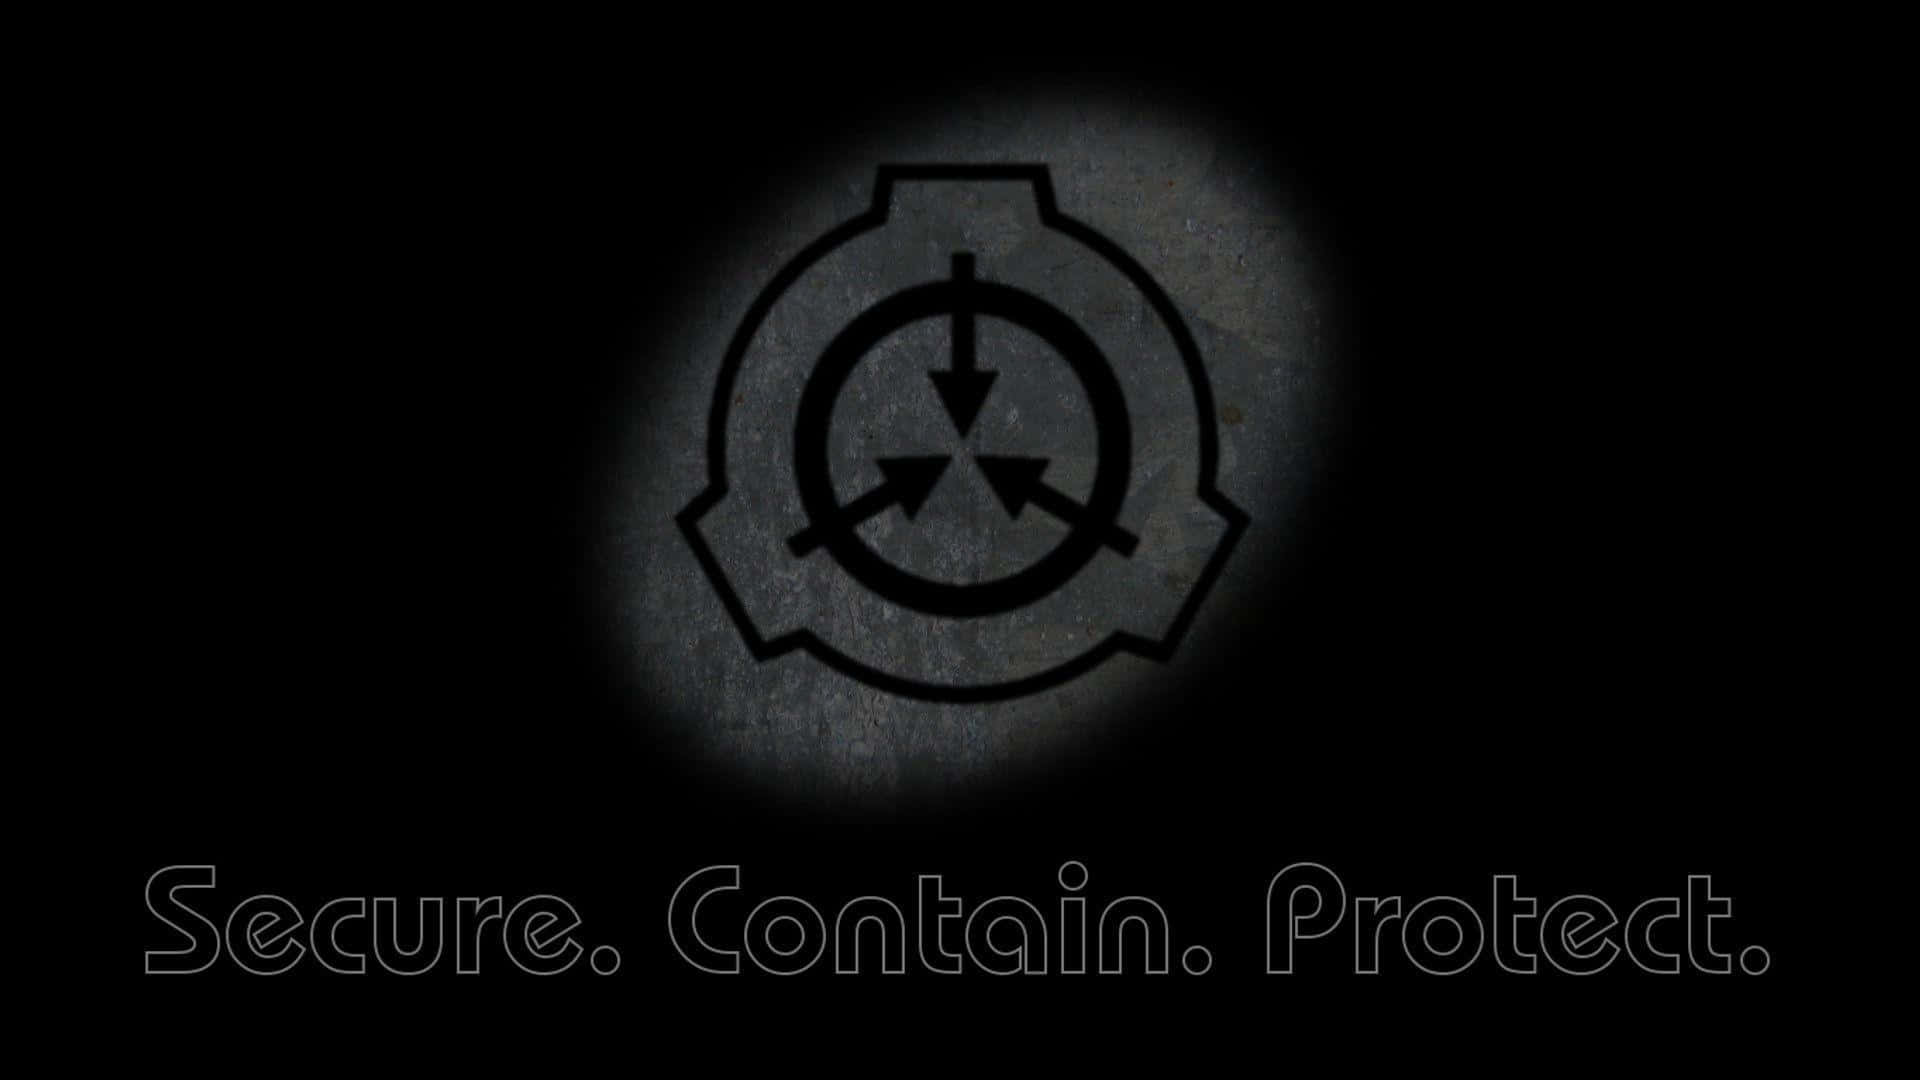 Secure Contain Protect Logo